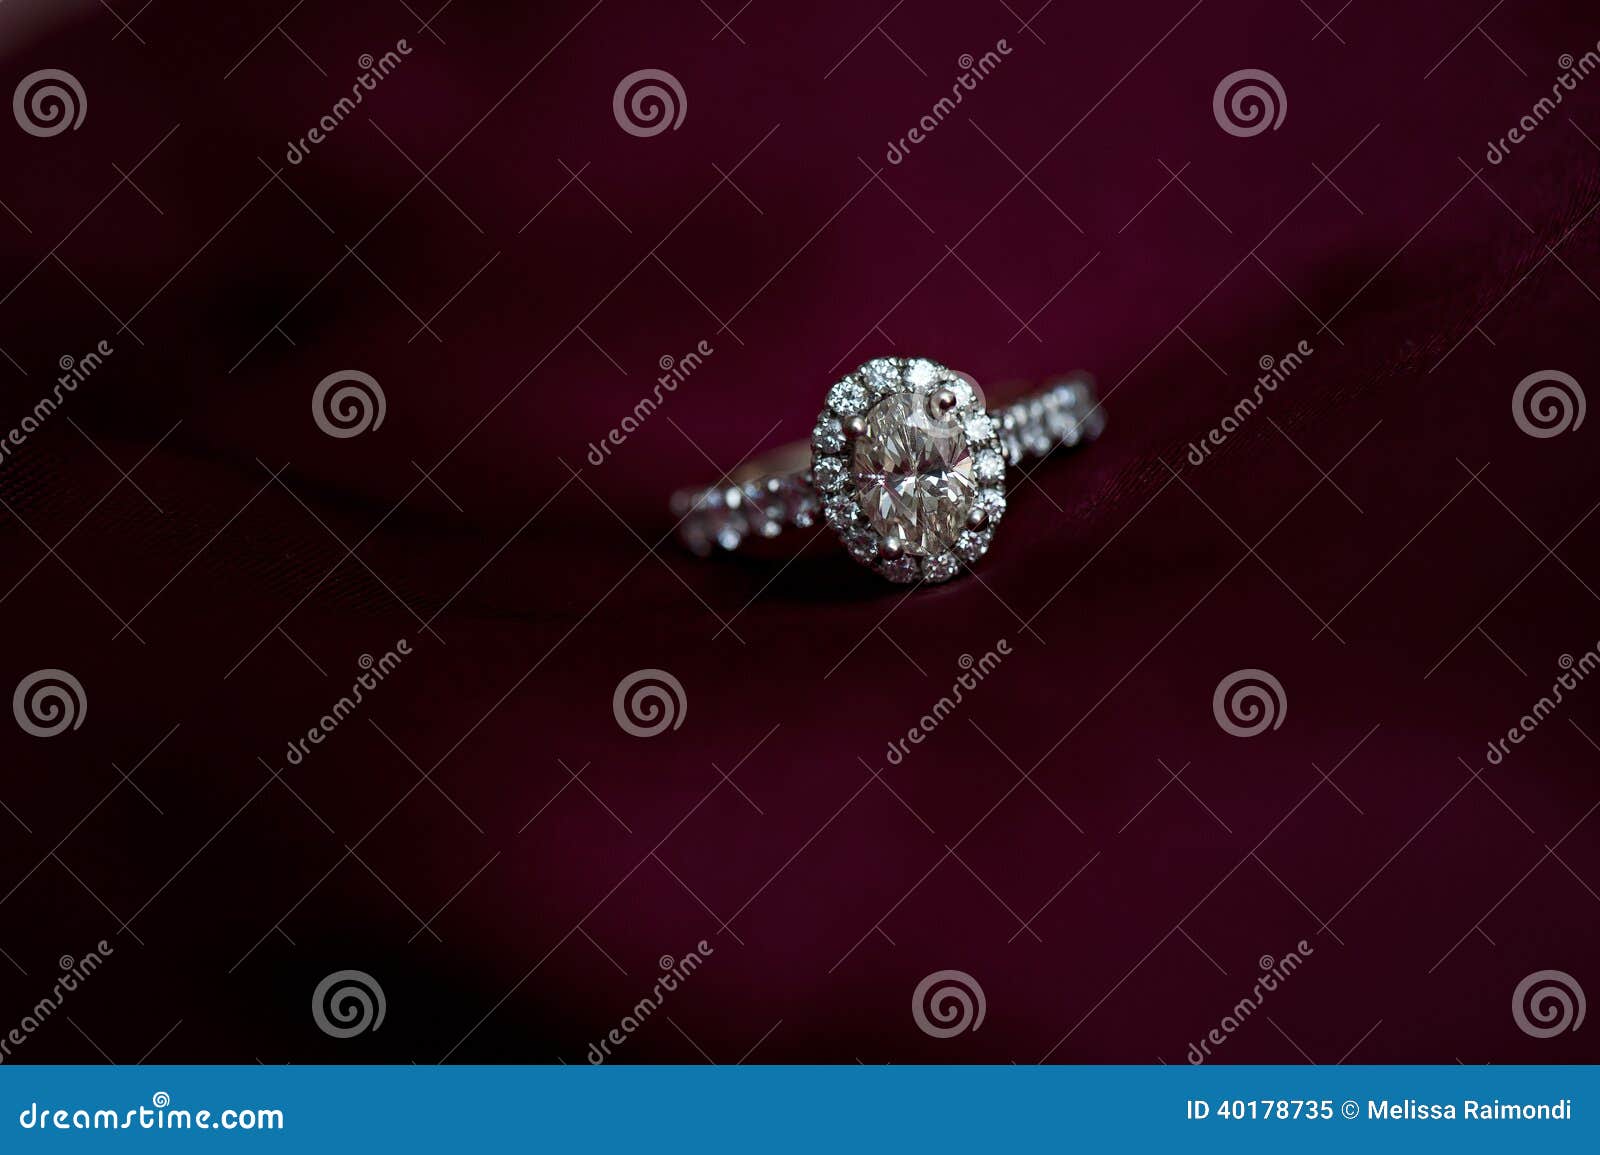 diamond engagement ring on red